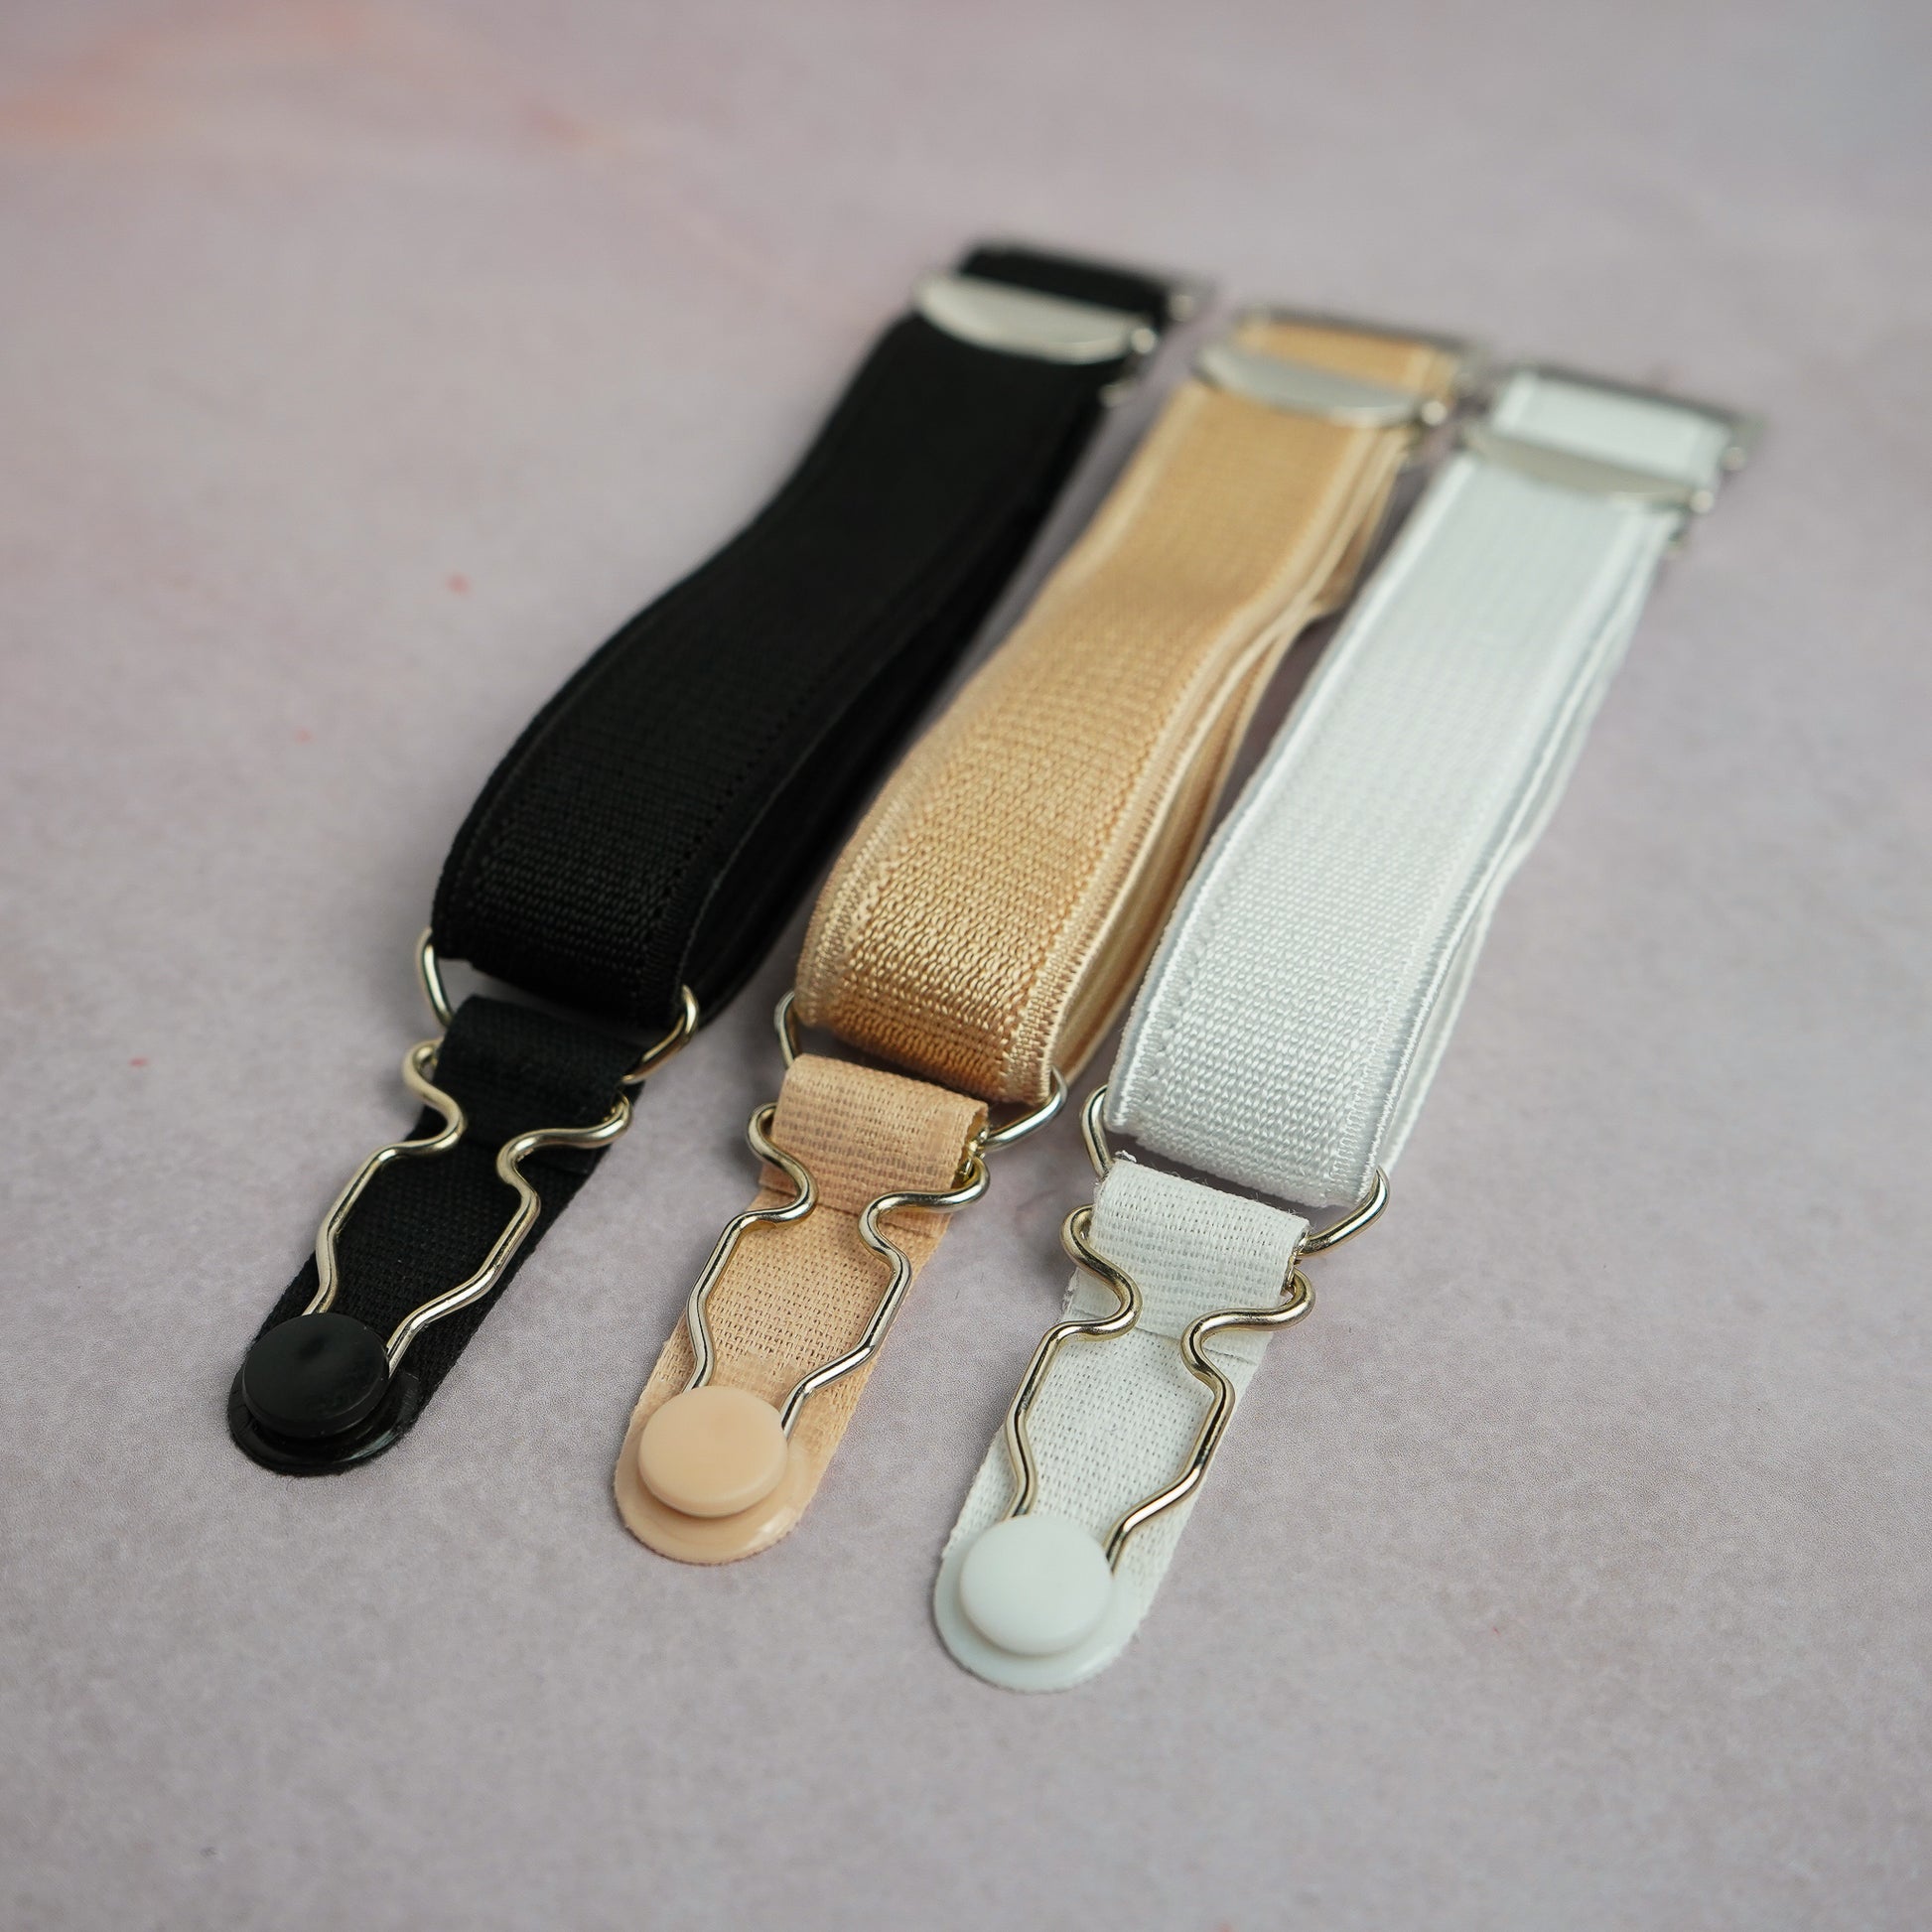 A grouping of hook on suspenders in white, black and beige.